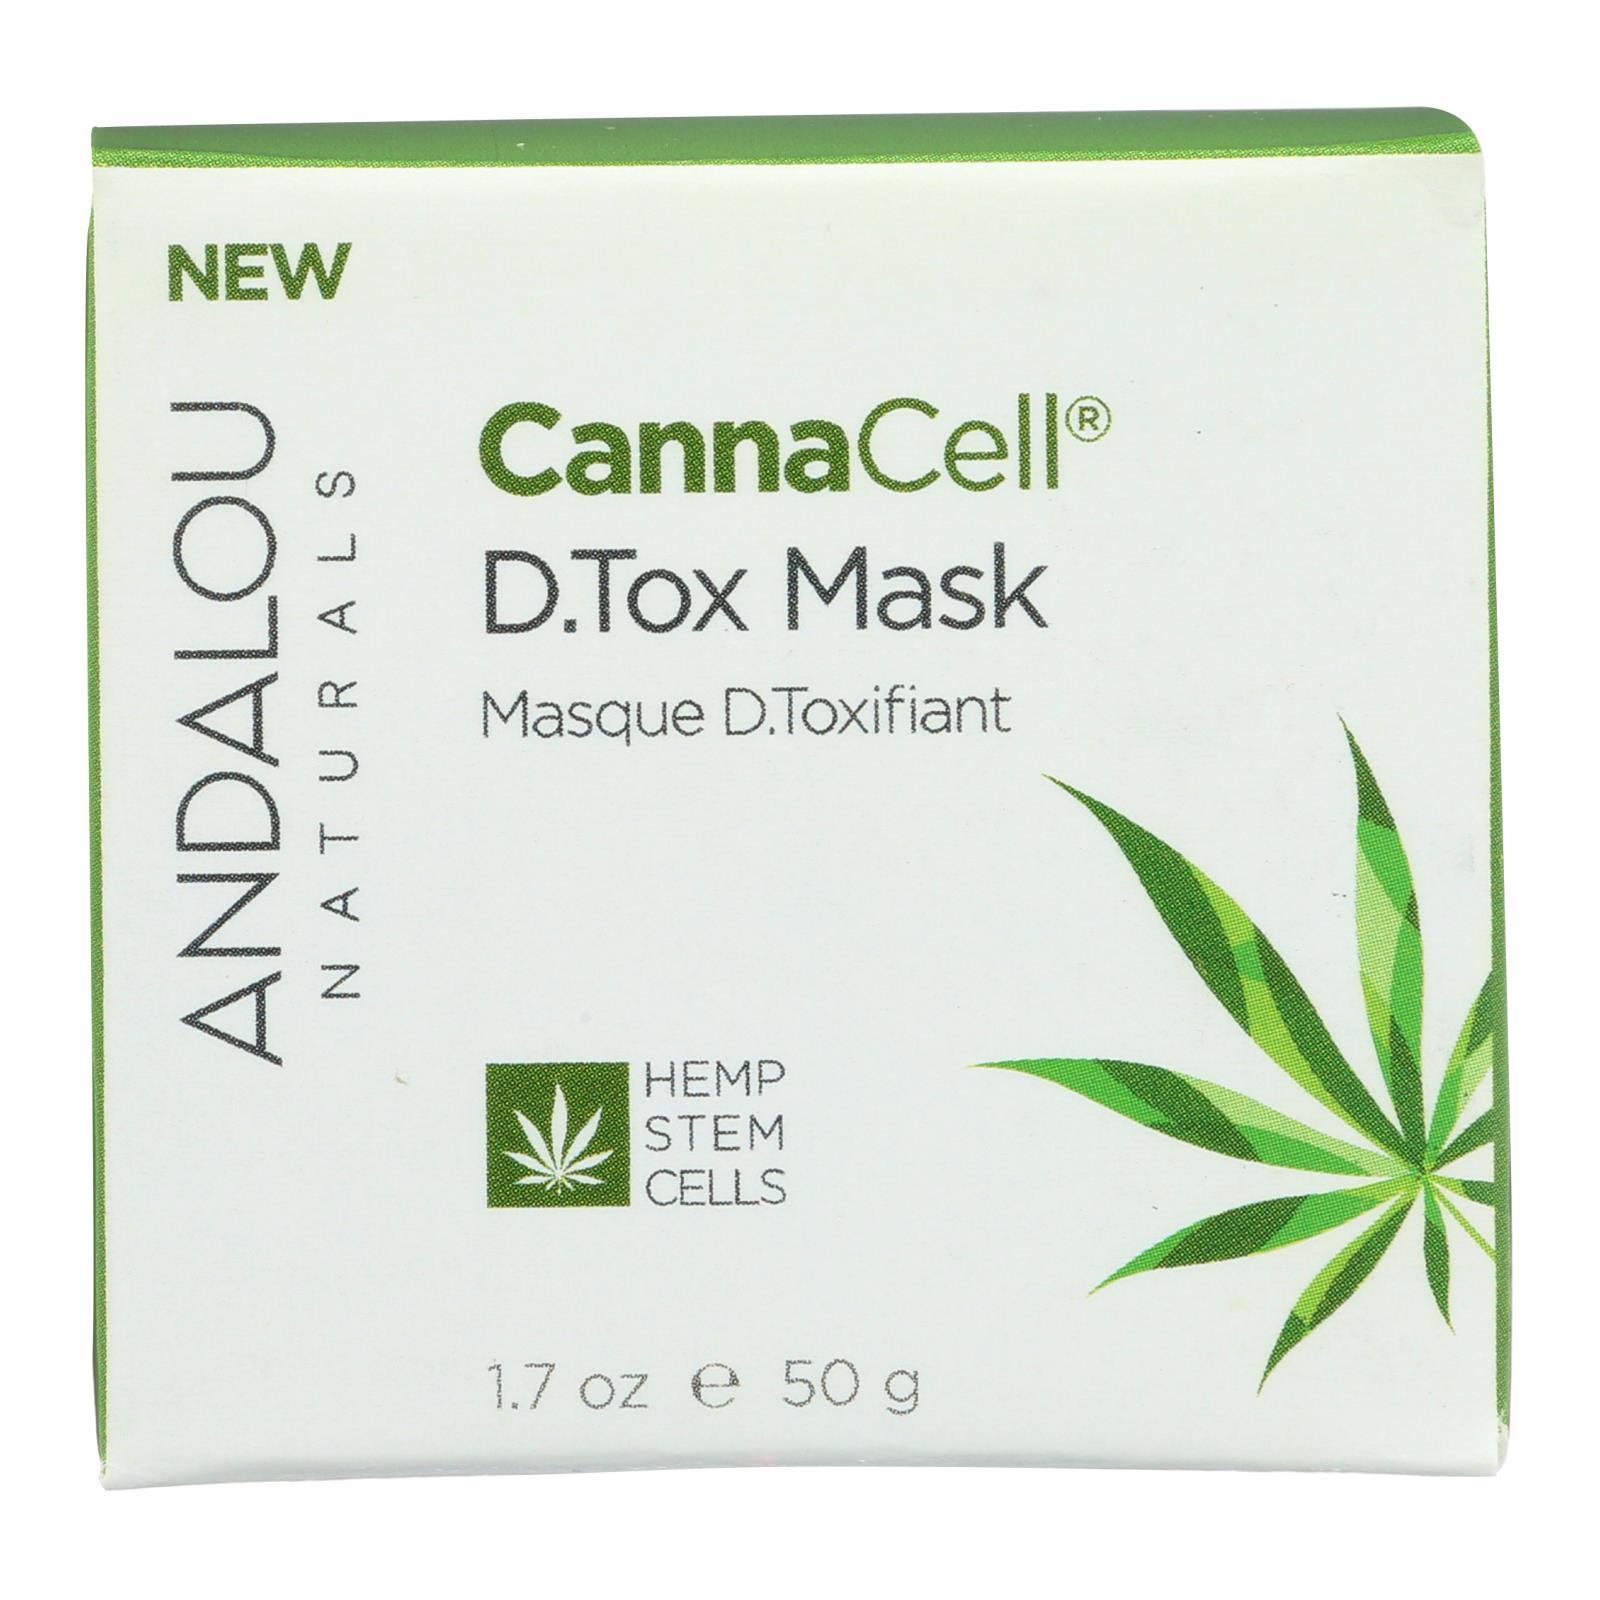 Image for Andalou Naturals - Cannacell D.tox Mask